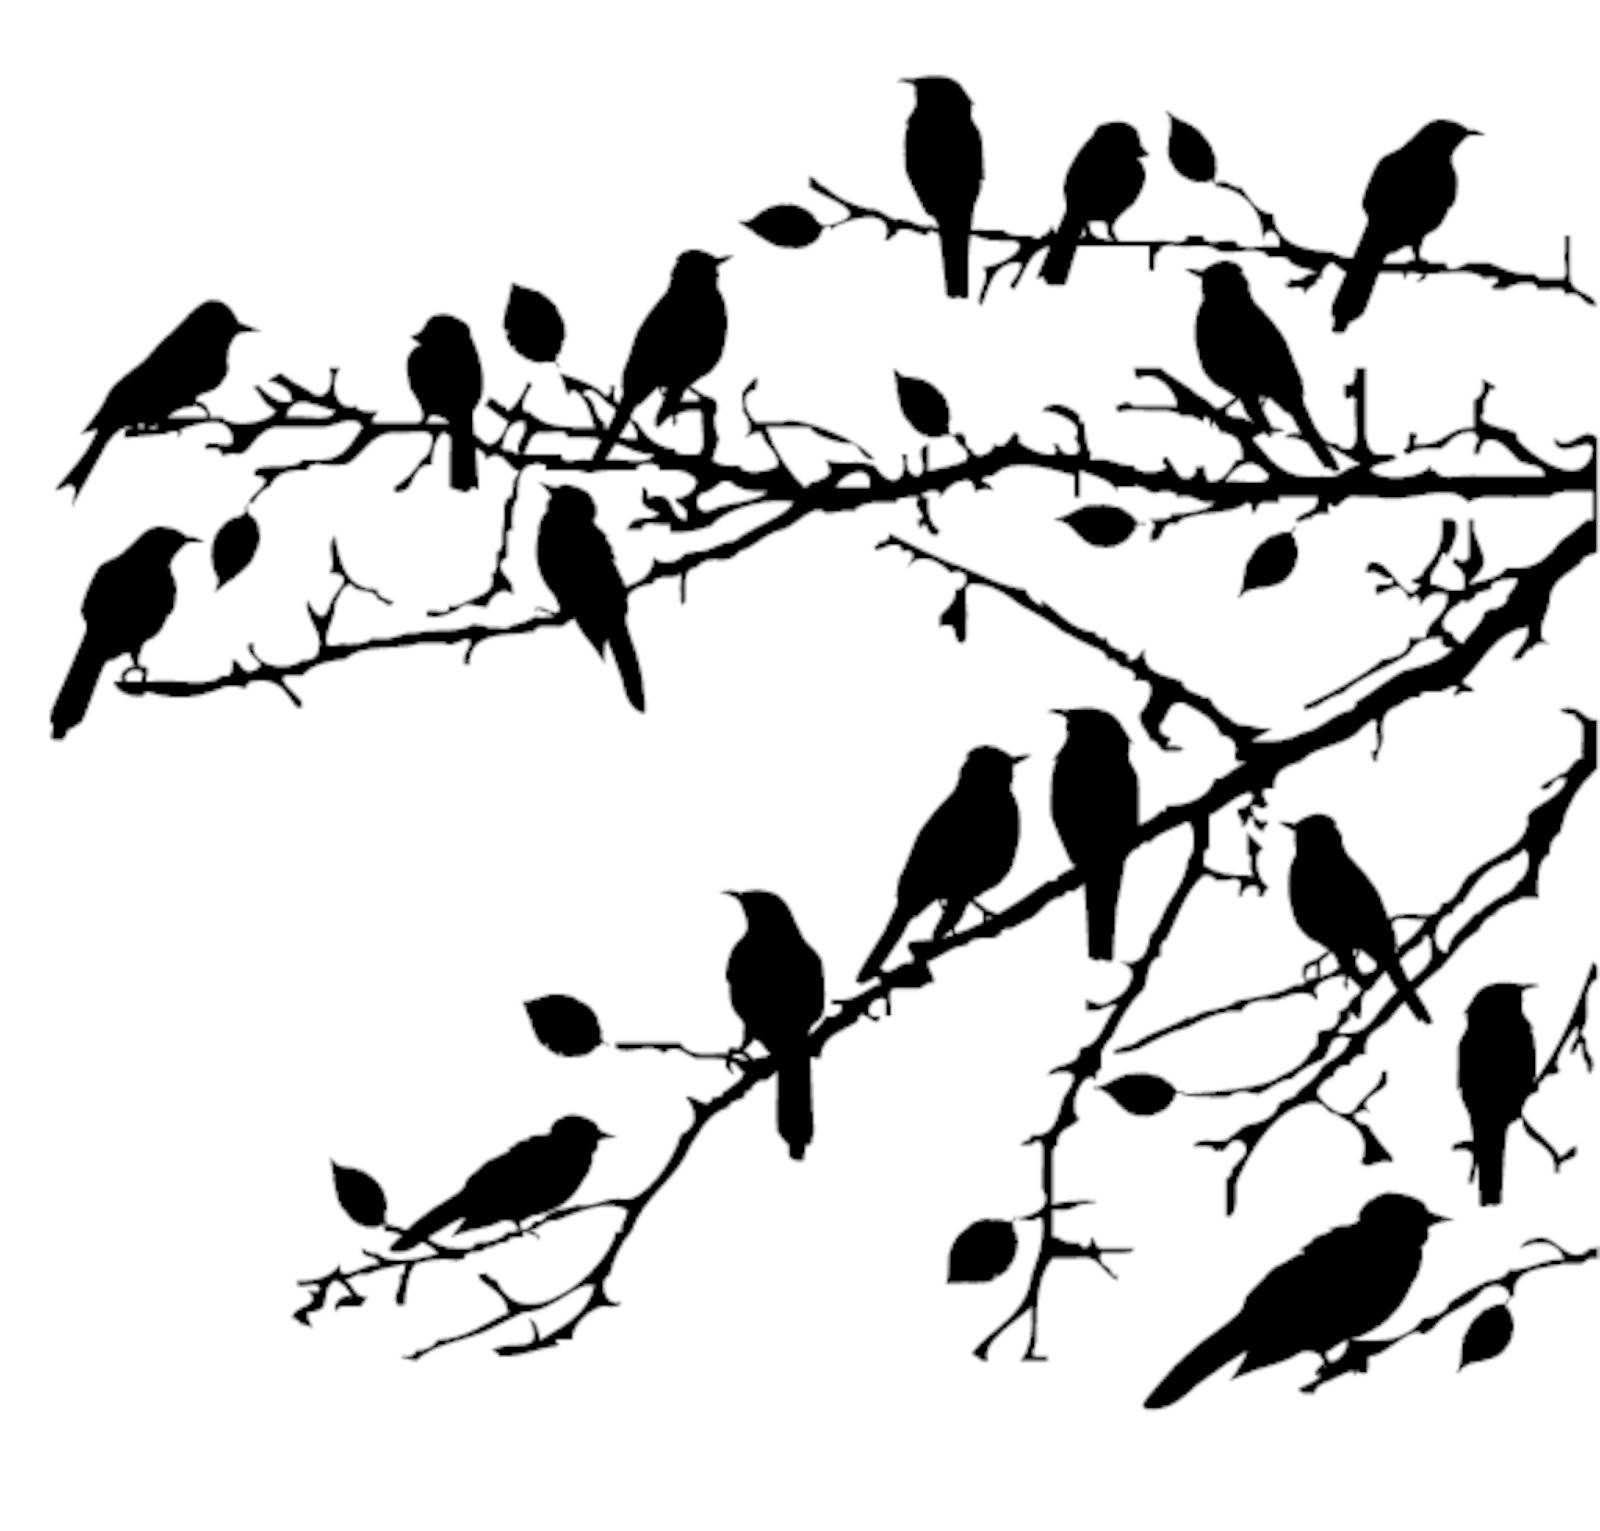 birds on branches by Lilac